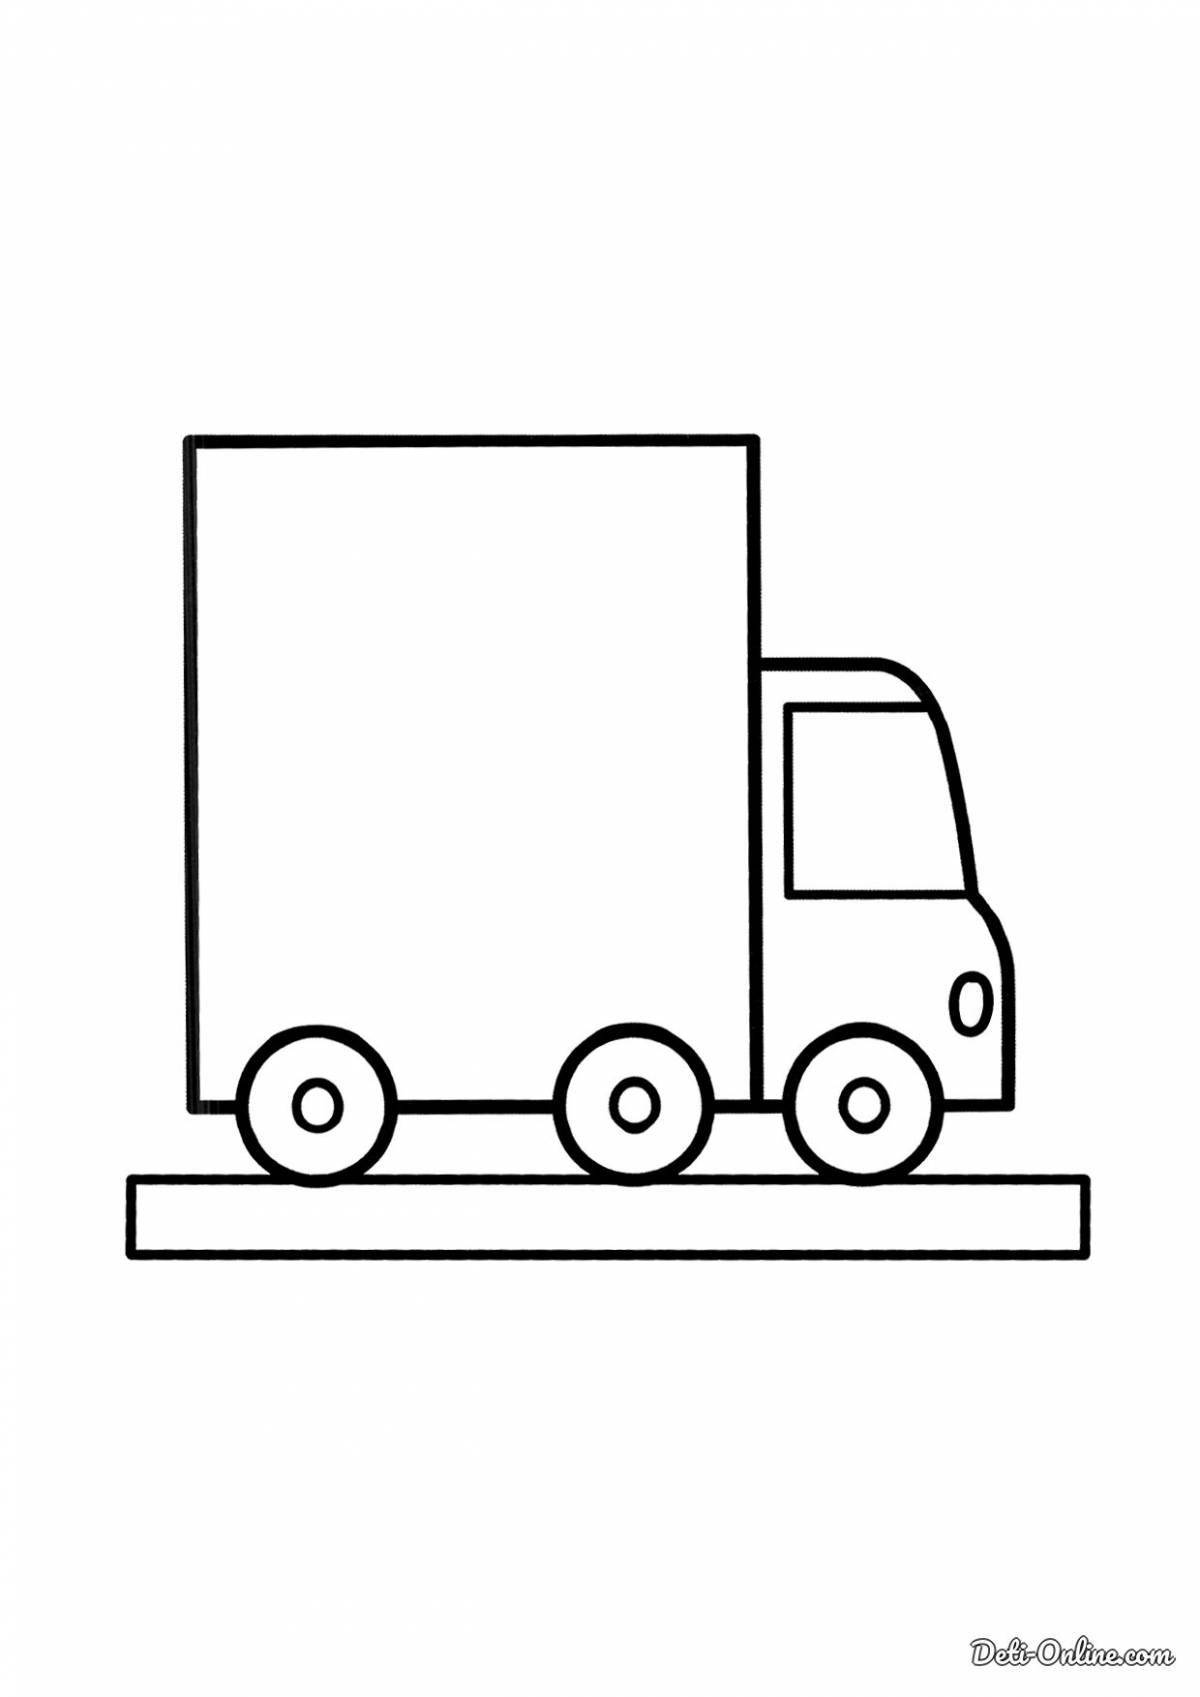 Great truck without wheels drawing